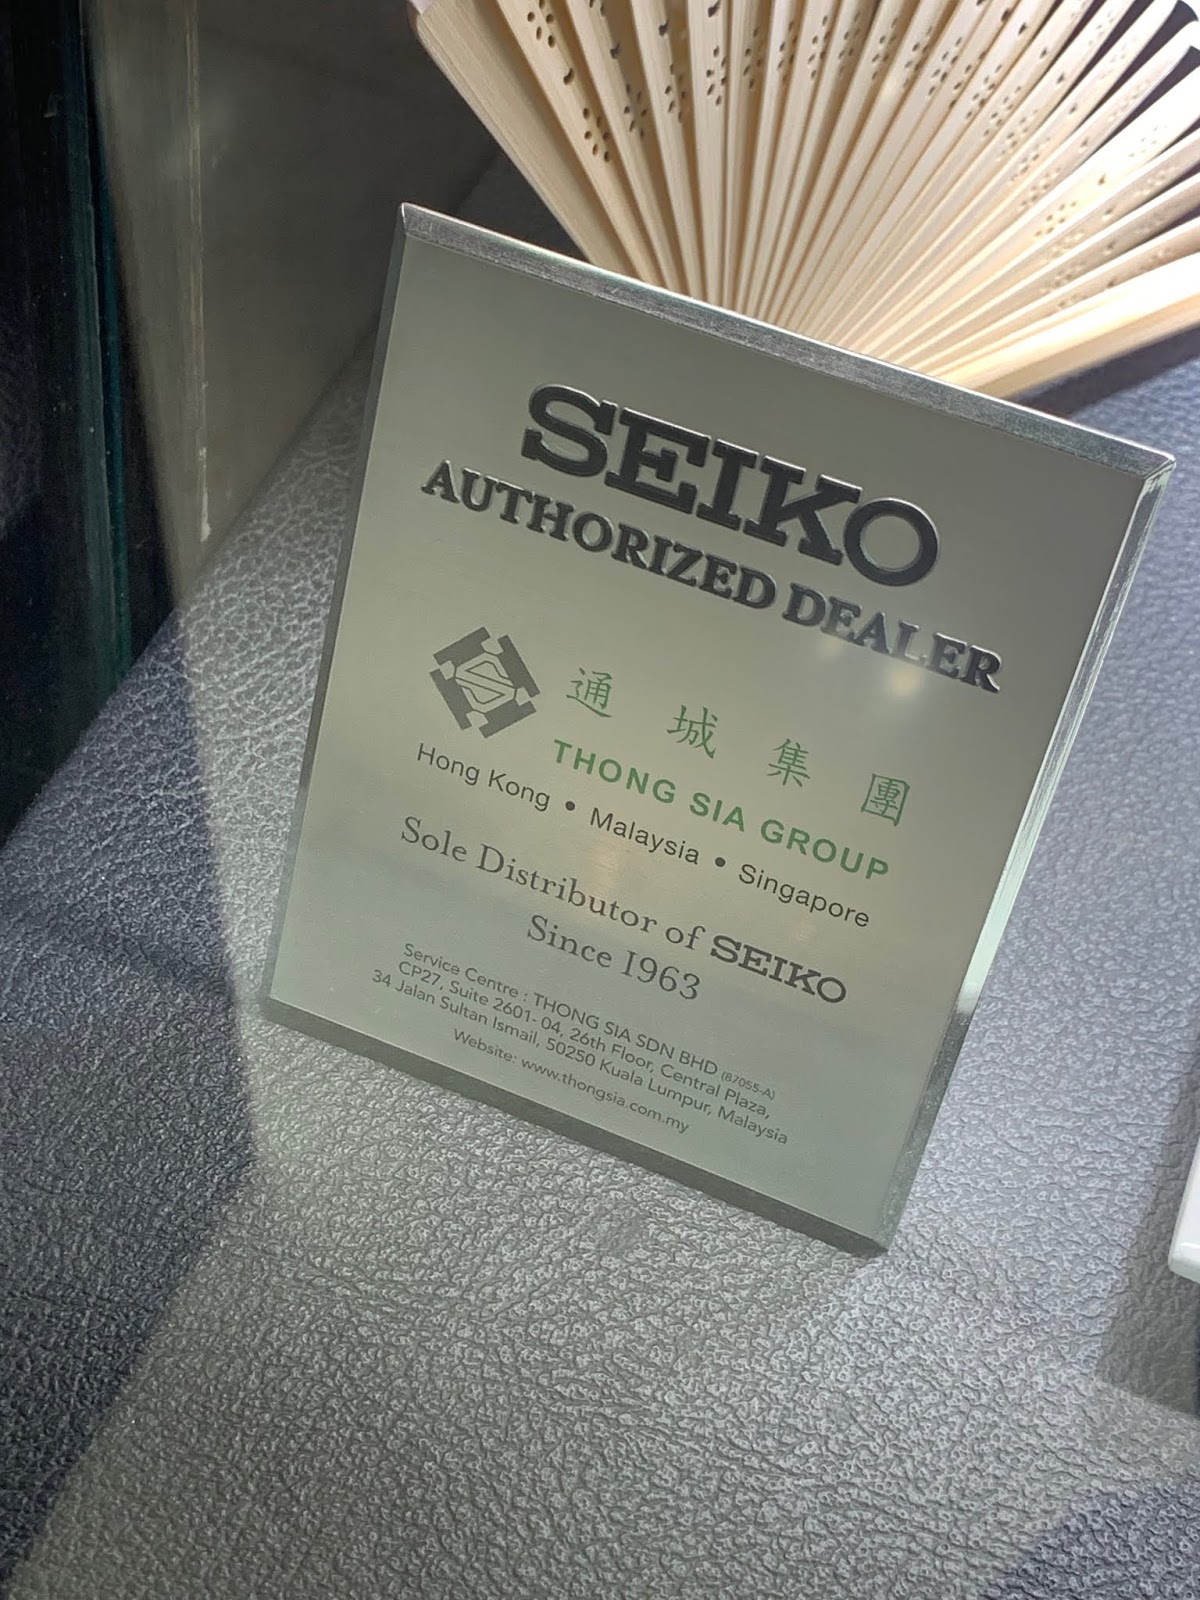 Who is the official service center for Seiko watches?